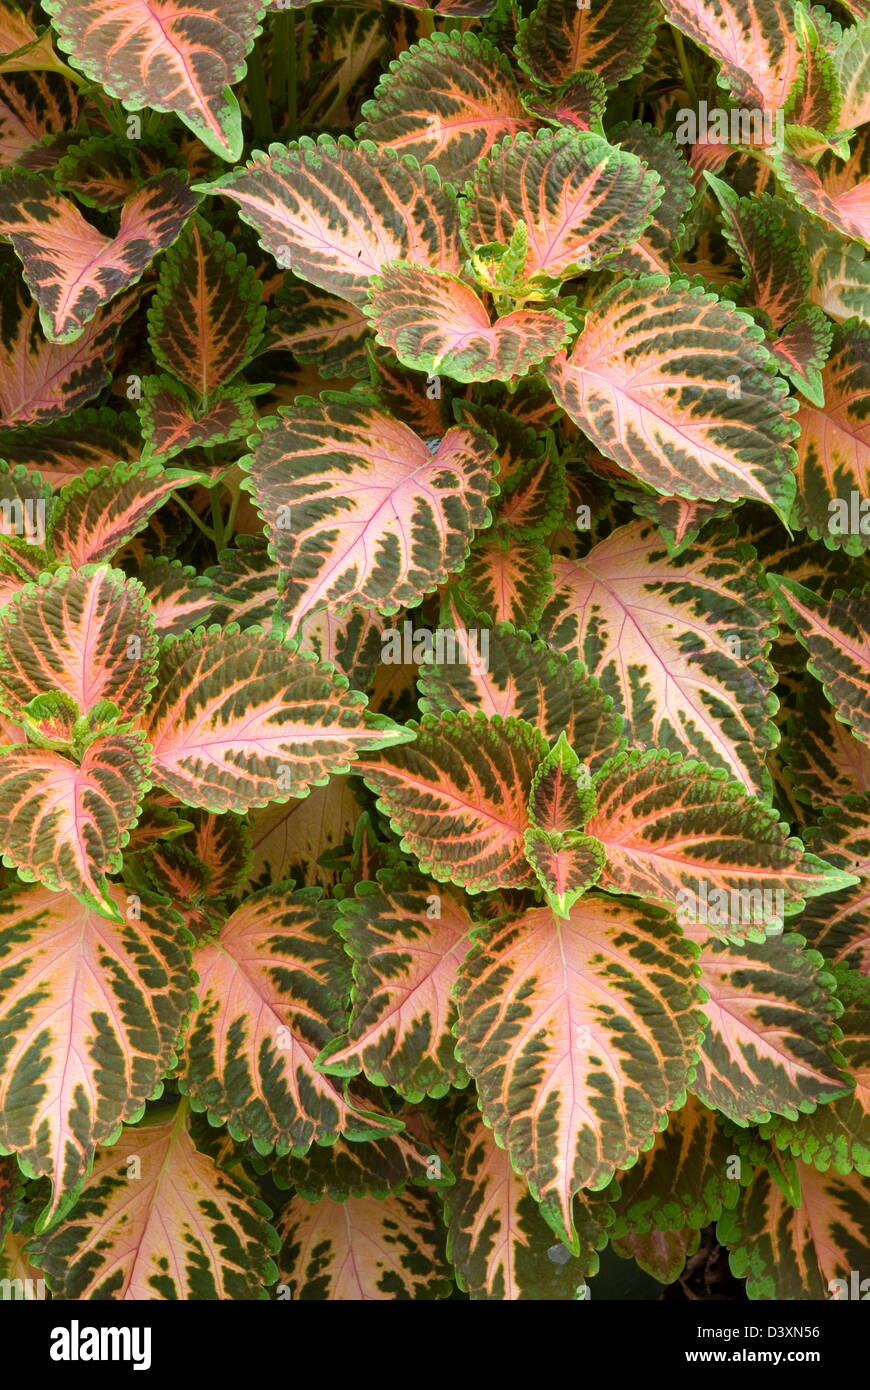 Coleus Wizard 'Coral Sunrise'. Date: 03.11.2008 Ref: ZB907 123496 0083 COMPULSORY CREDIT: Photos Horticultural/Photoshot Stock Photo